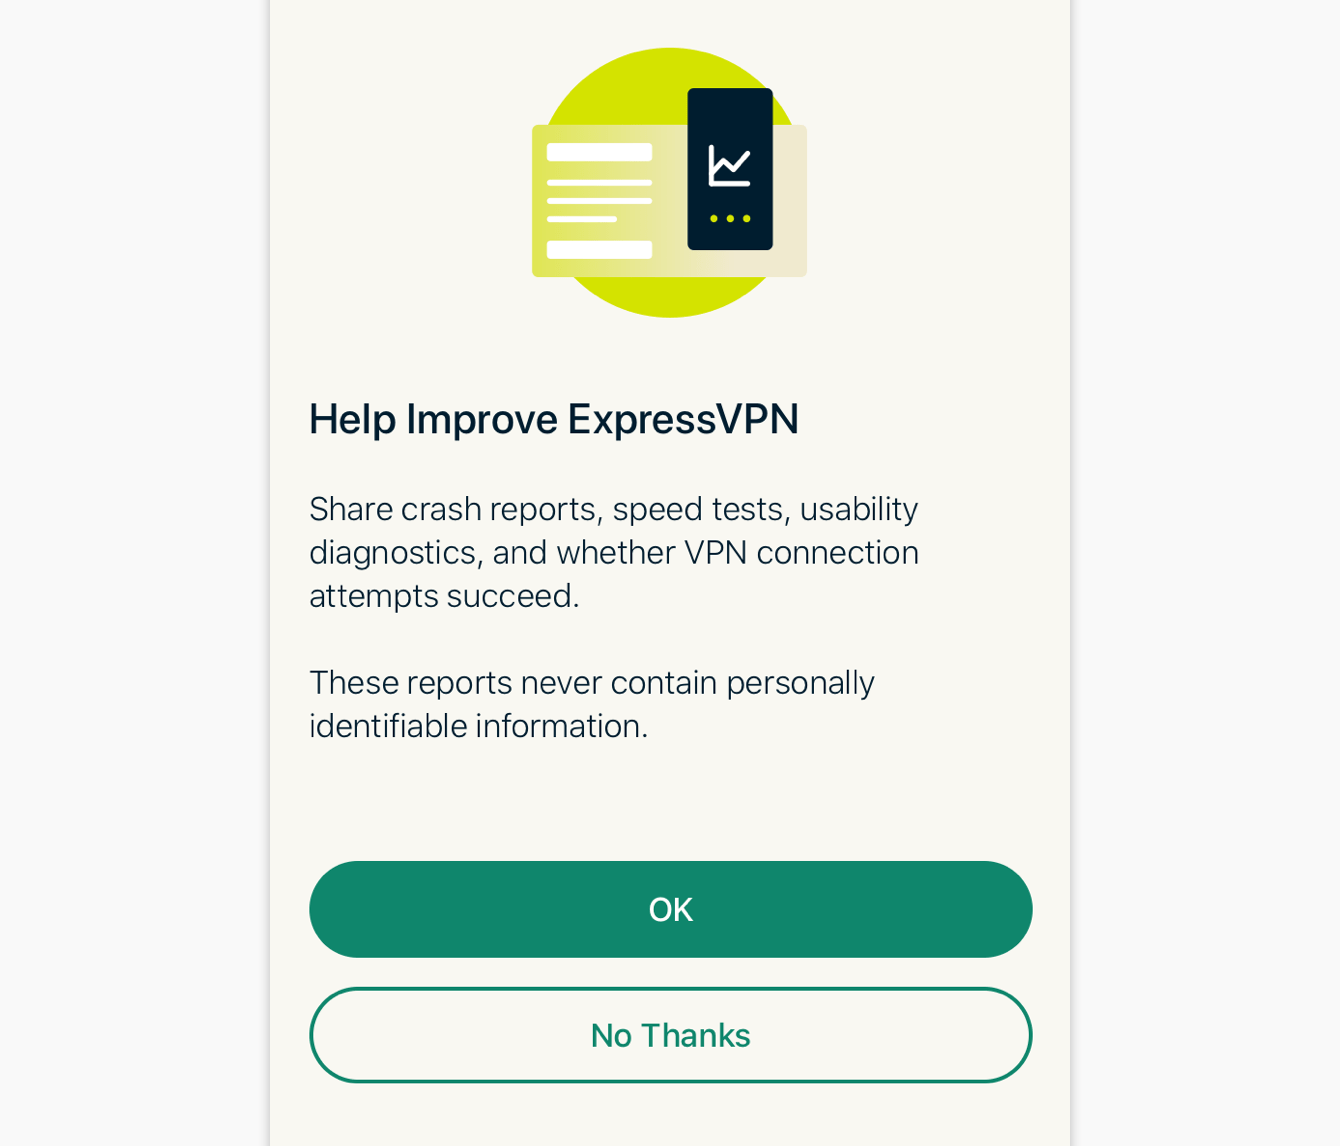 Select your preference for helping improve ExpressVPN.